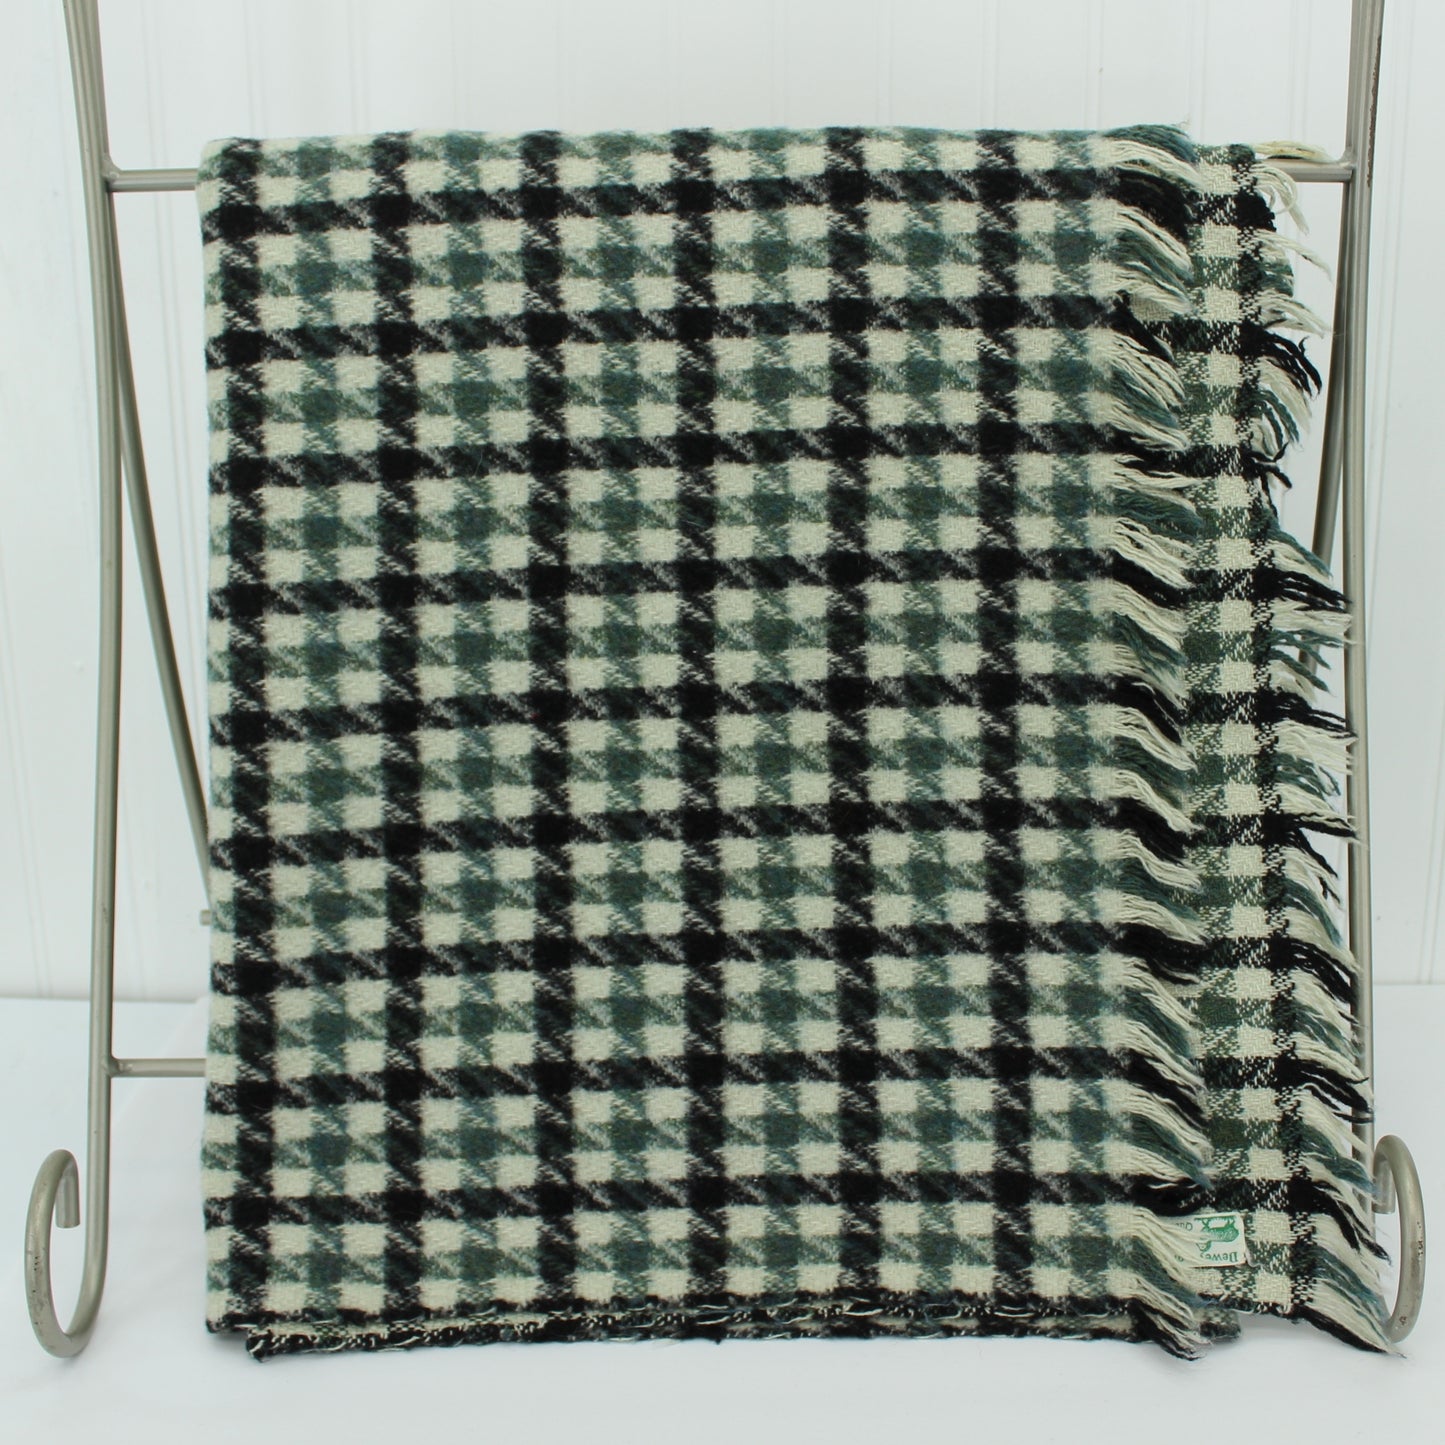 Rare Dewey's of Vermont Soft Wool Throw Handsome Teal & Black Plaid Vintage Pre 1972 excellent quality wool soft